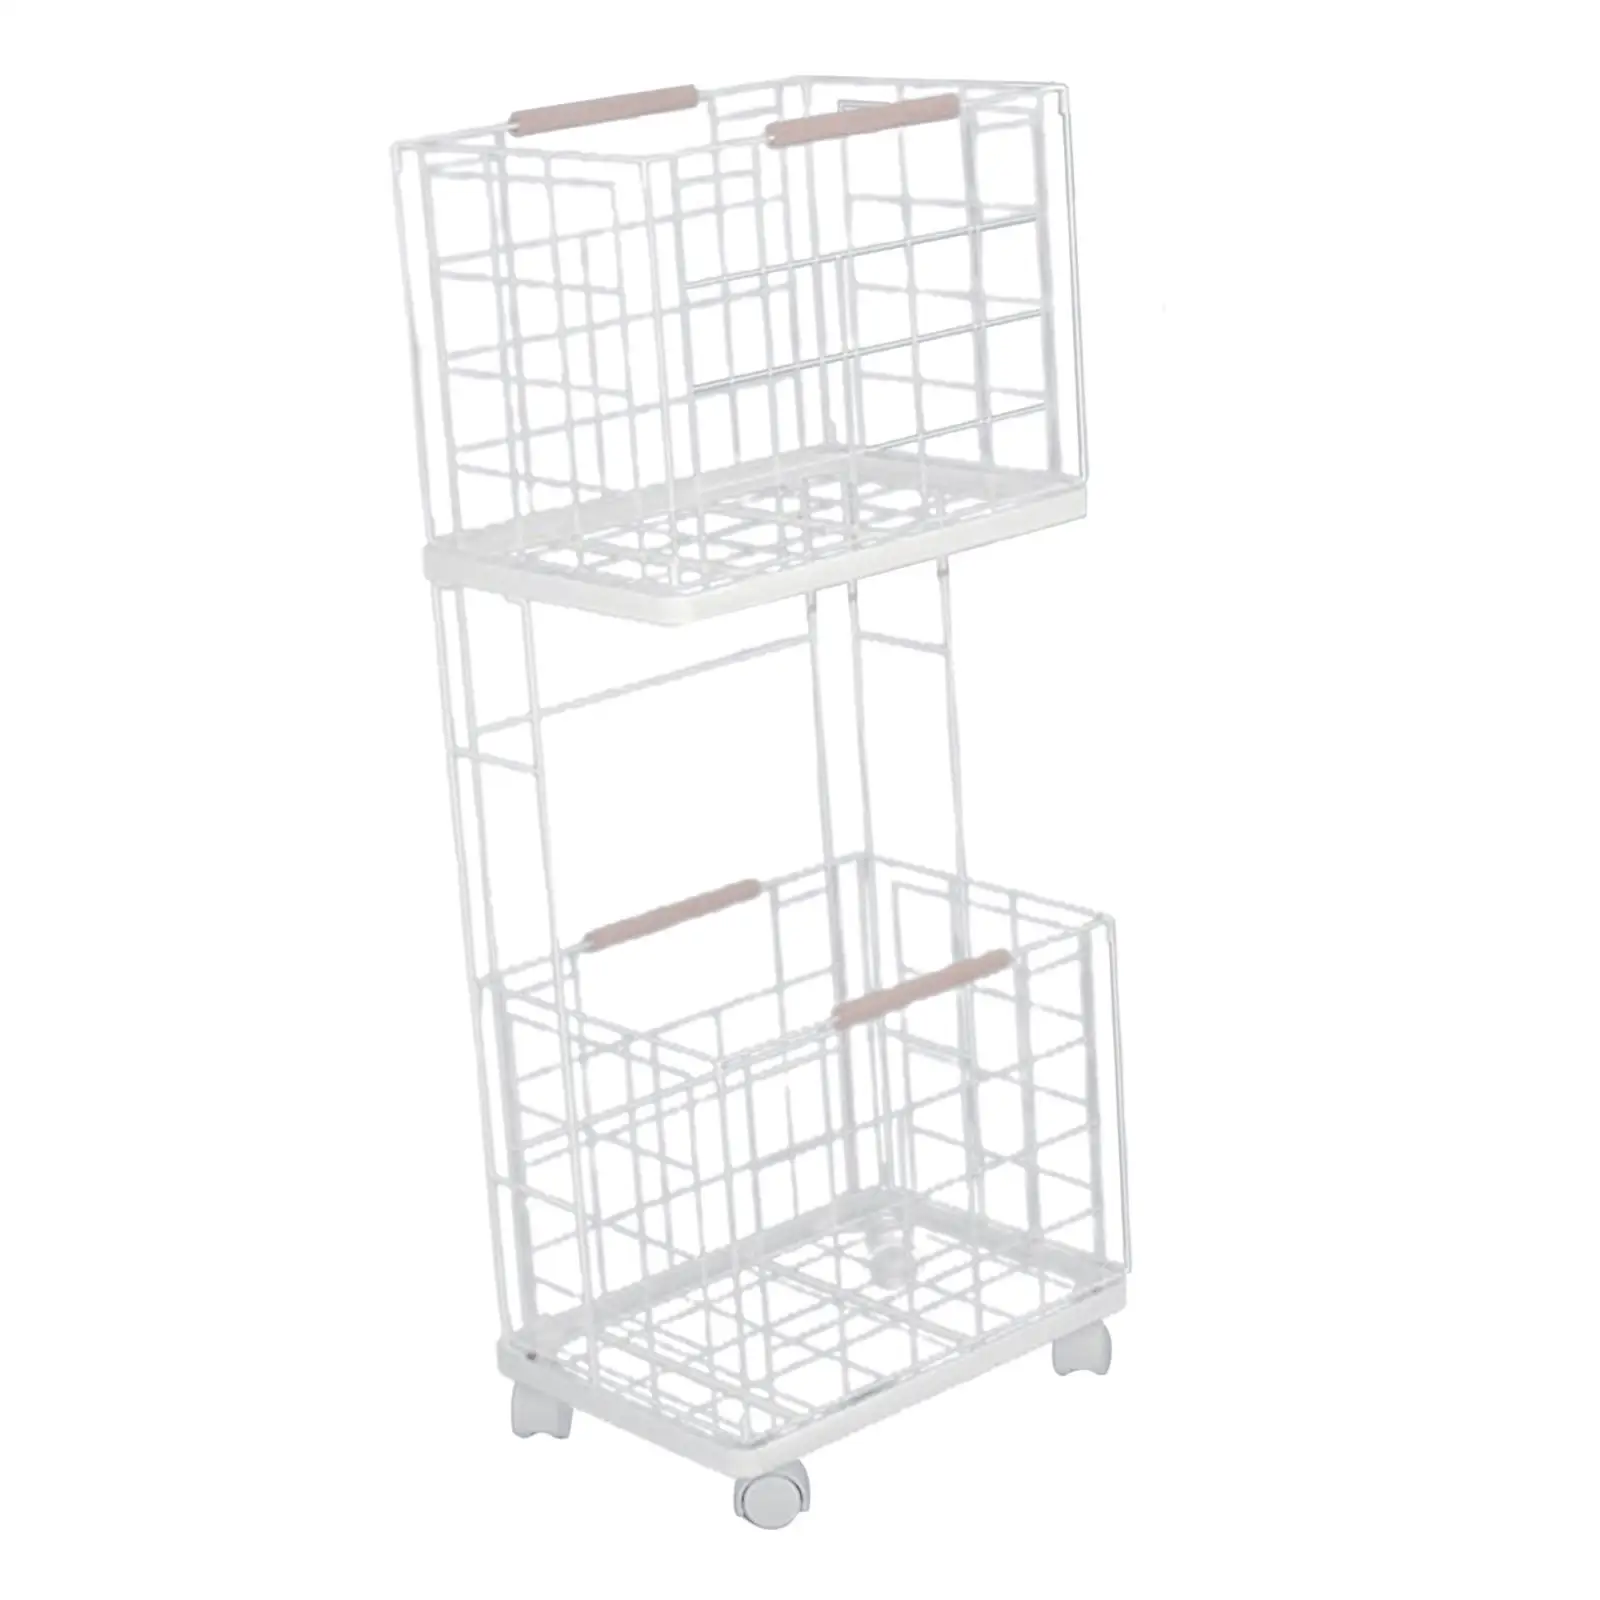 2 Tier Storage Cart Large Capacity with Wheels Removable Multifunctional Laundry Clothes Basket Storage Rack for Home Farmhouse